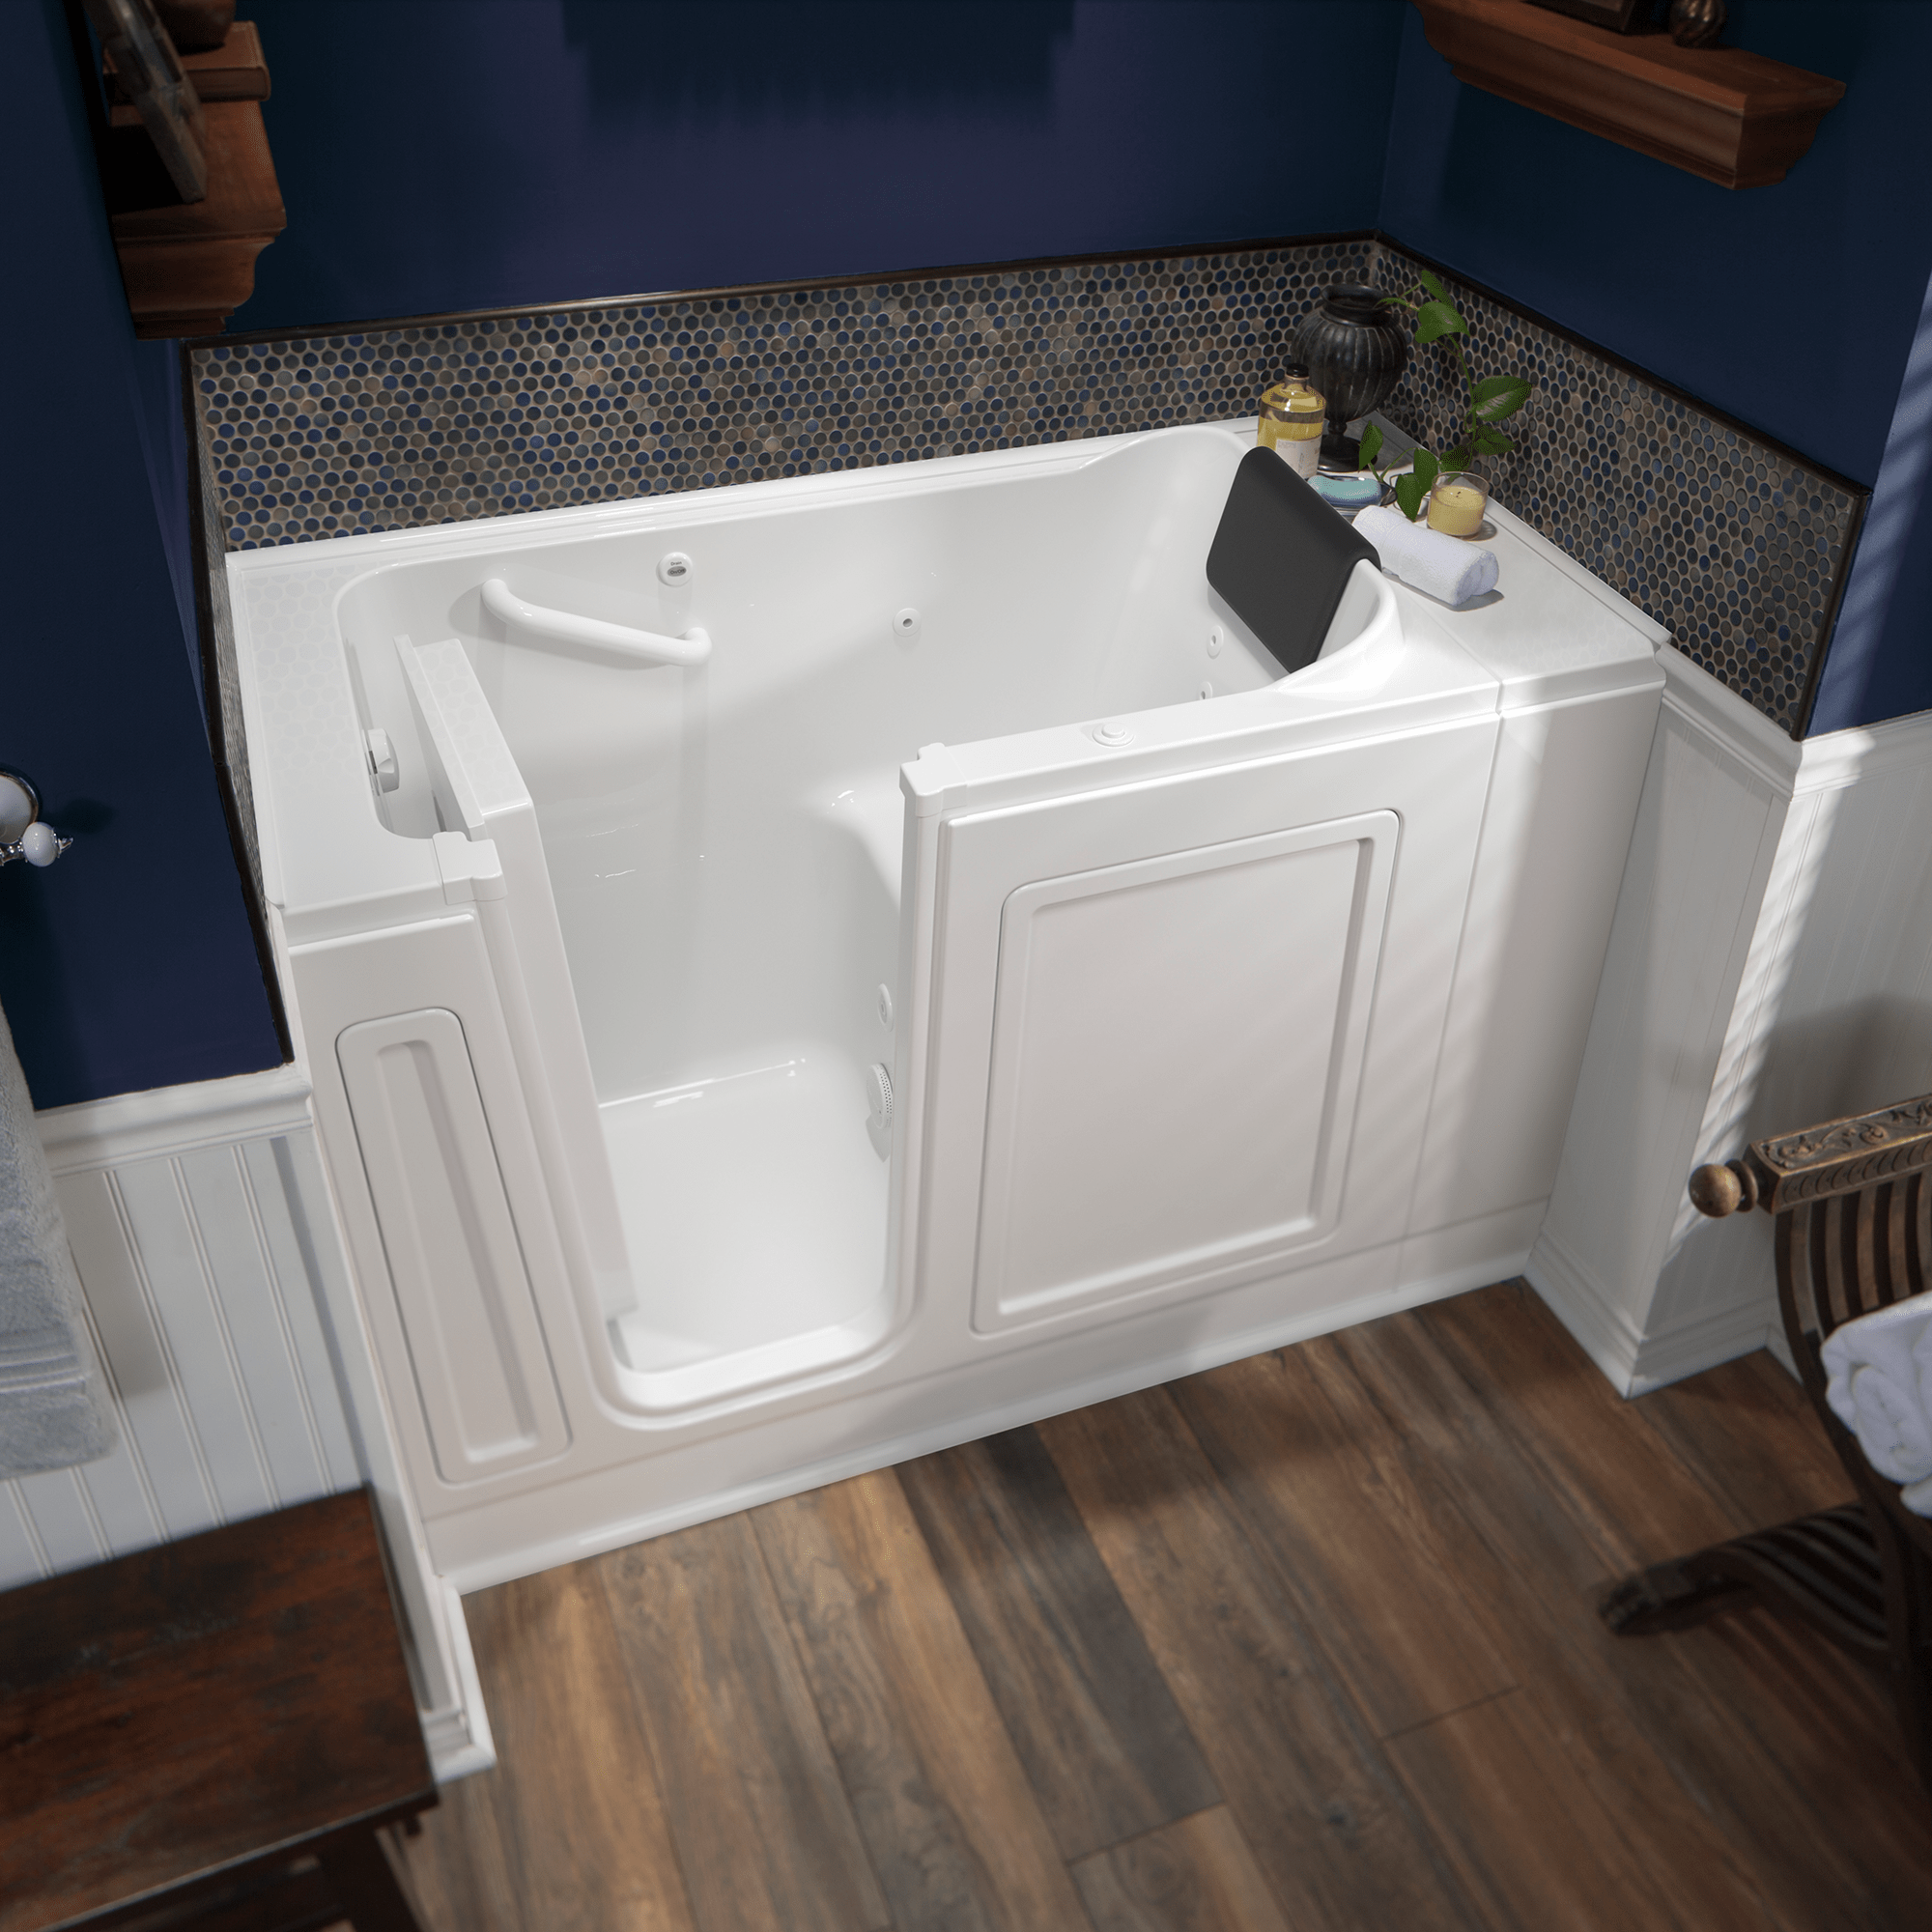 Acrylic Luxury Series 28 x 48 Inch Walk in Tub With Whirlpool System   Left Hand Drain WIB WHITE